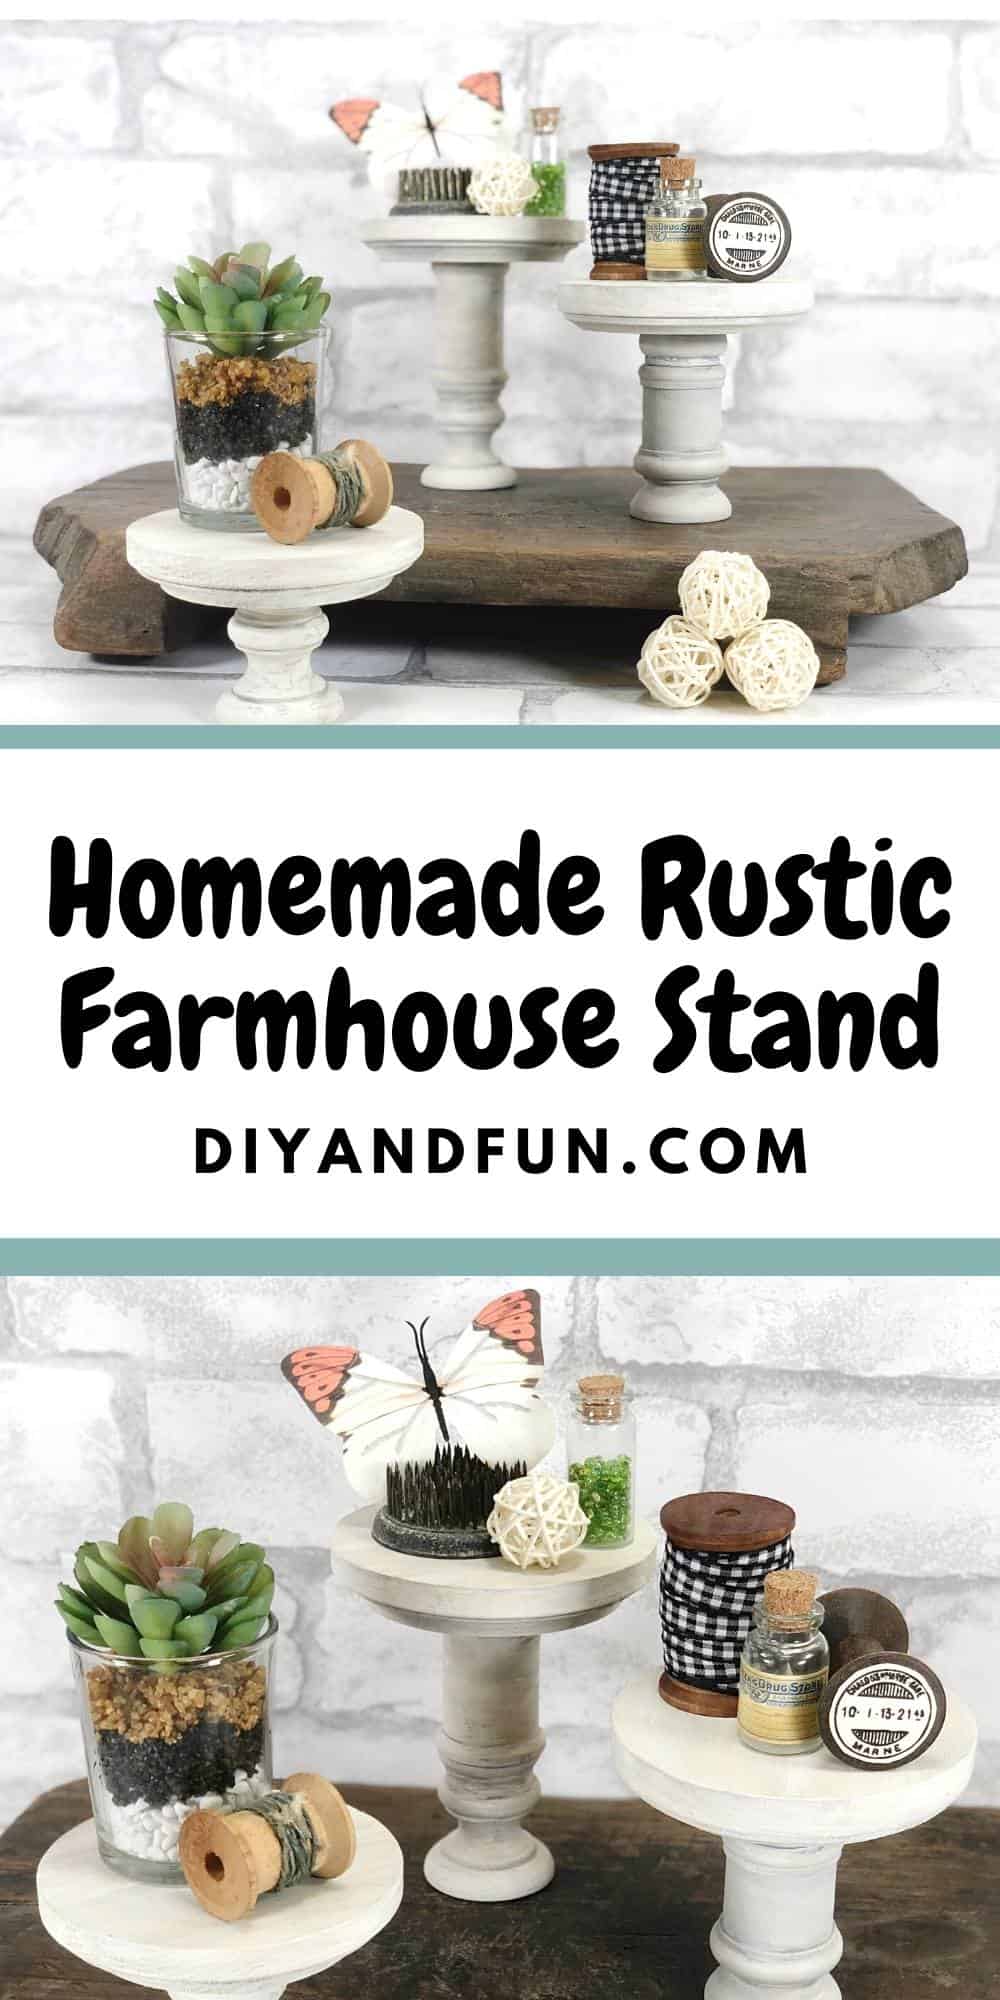 Homemade Rustic Farmhouse Stand